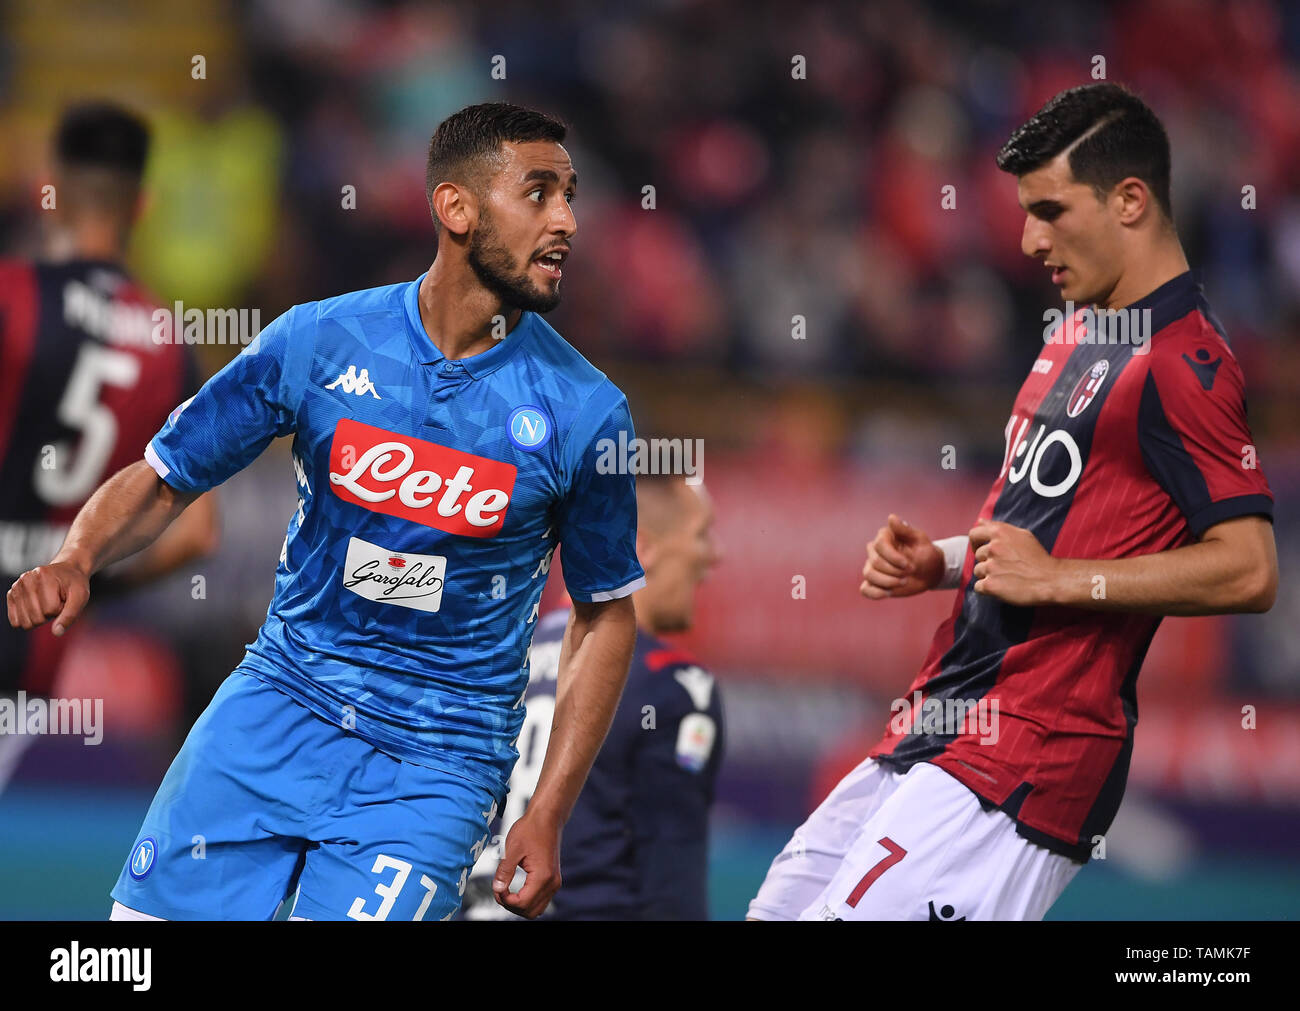 Bologna, Italy. 25th May, 2019. Napoli's Faouzi Ghoulam (L) celebrates his goal during a Serie A soccer match between Bologna and Napoli in Bologna, Italy, May 25, 2019. Bologna won 3-2. Credit: Alberto Lingria/Xinhua/Alamy Live News Stock Photo